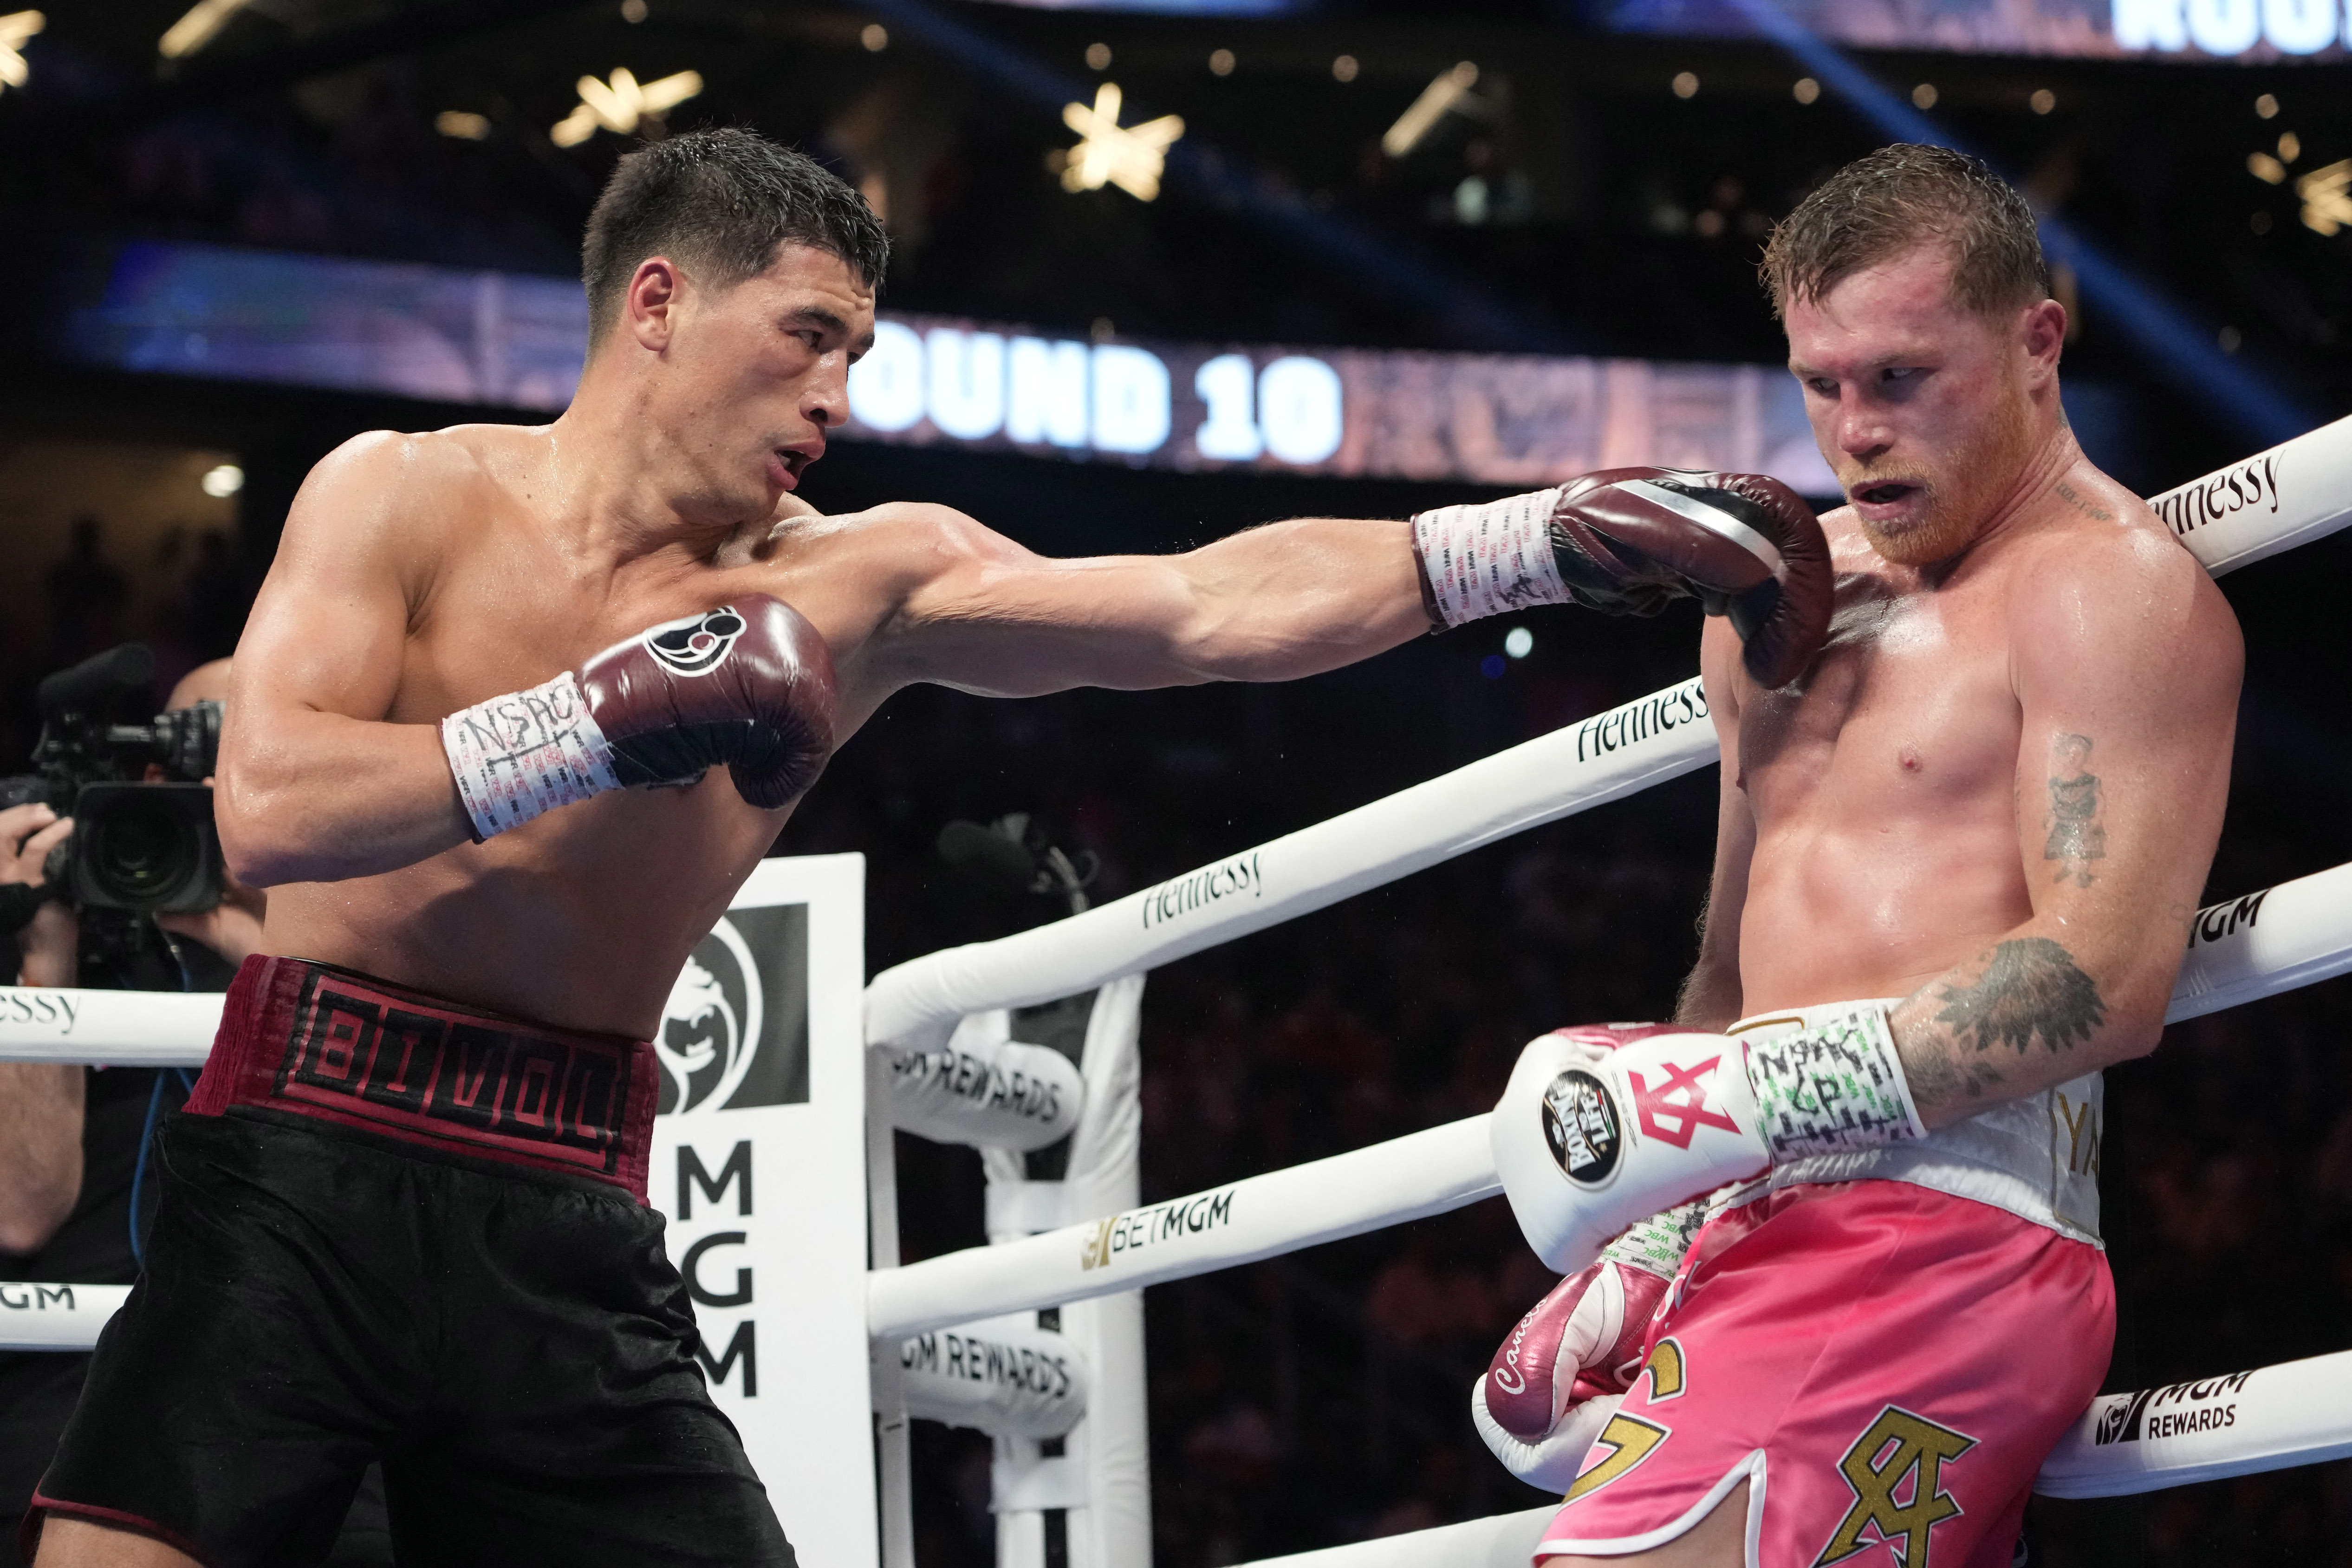 The lack of the jab was why Bivol got closer to Canelo and managed to beat him, according to Mike Tyson (Photo: Joe Camporeale / USA TODAY Sports)